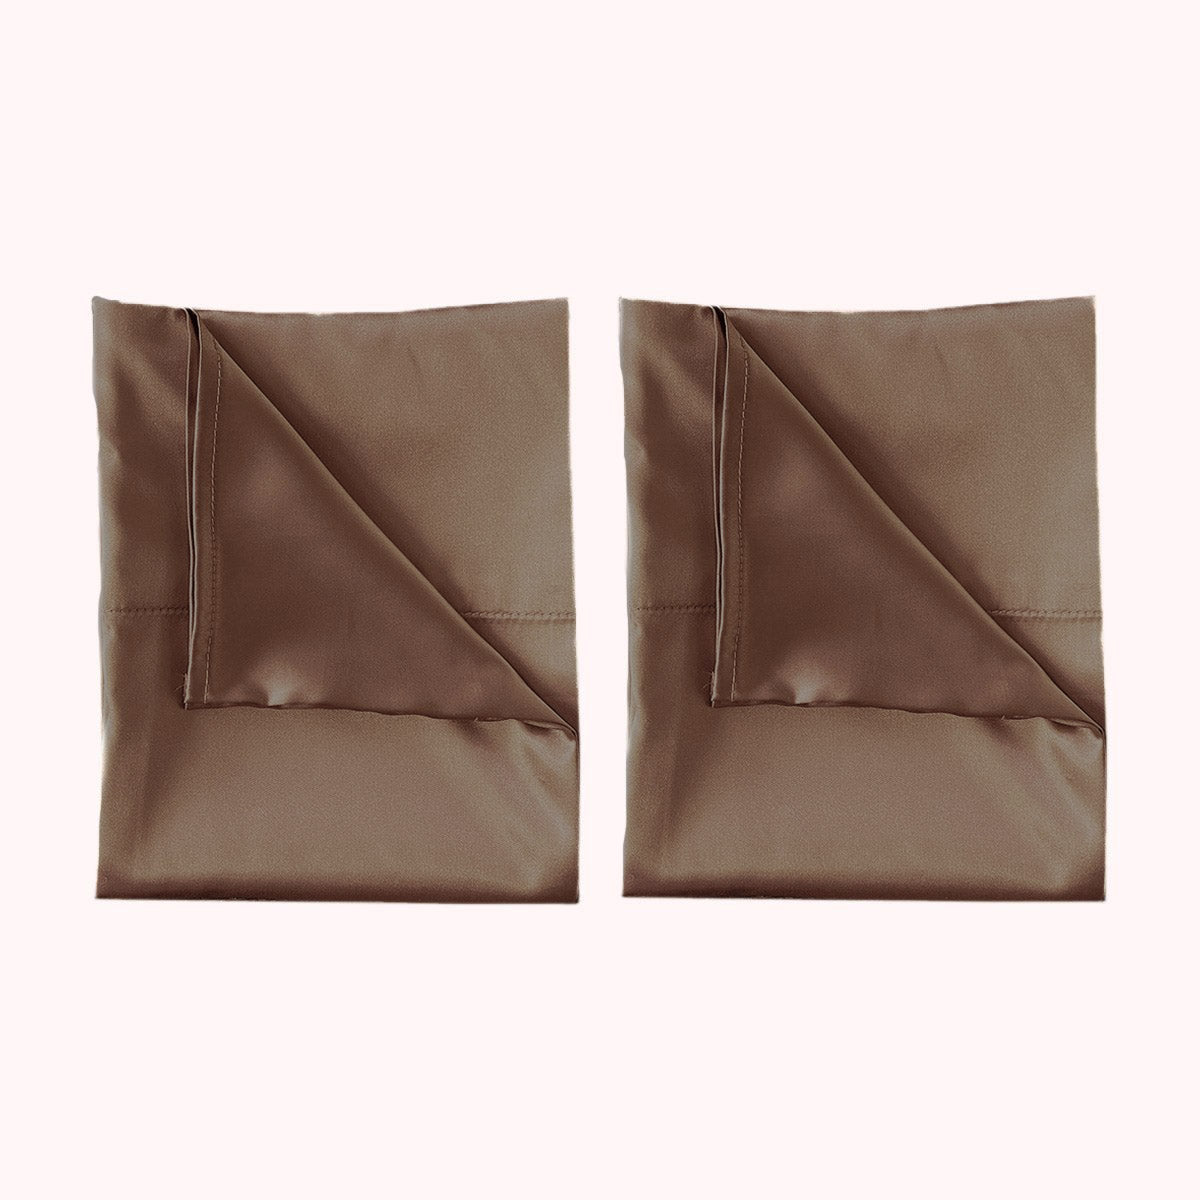 2 folded satin pillowcases in taupe